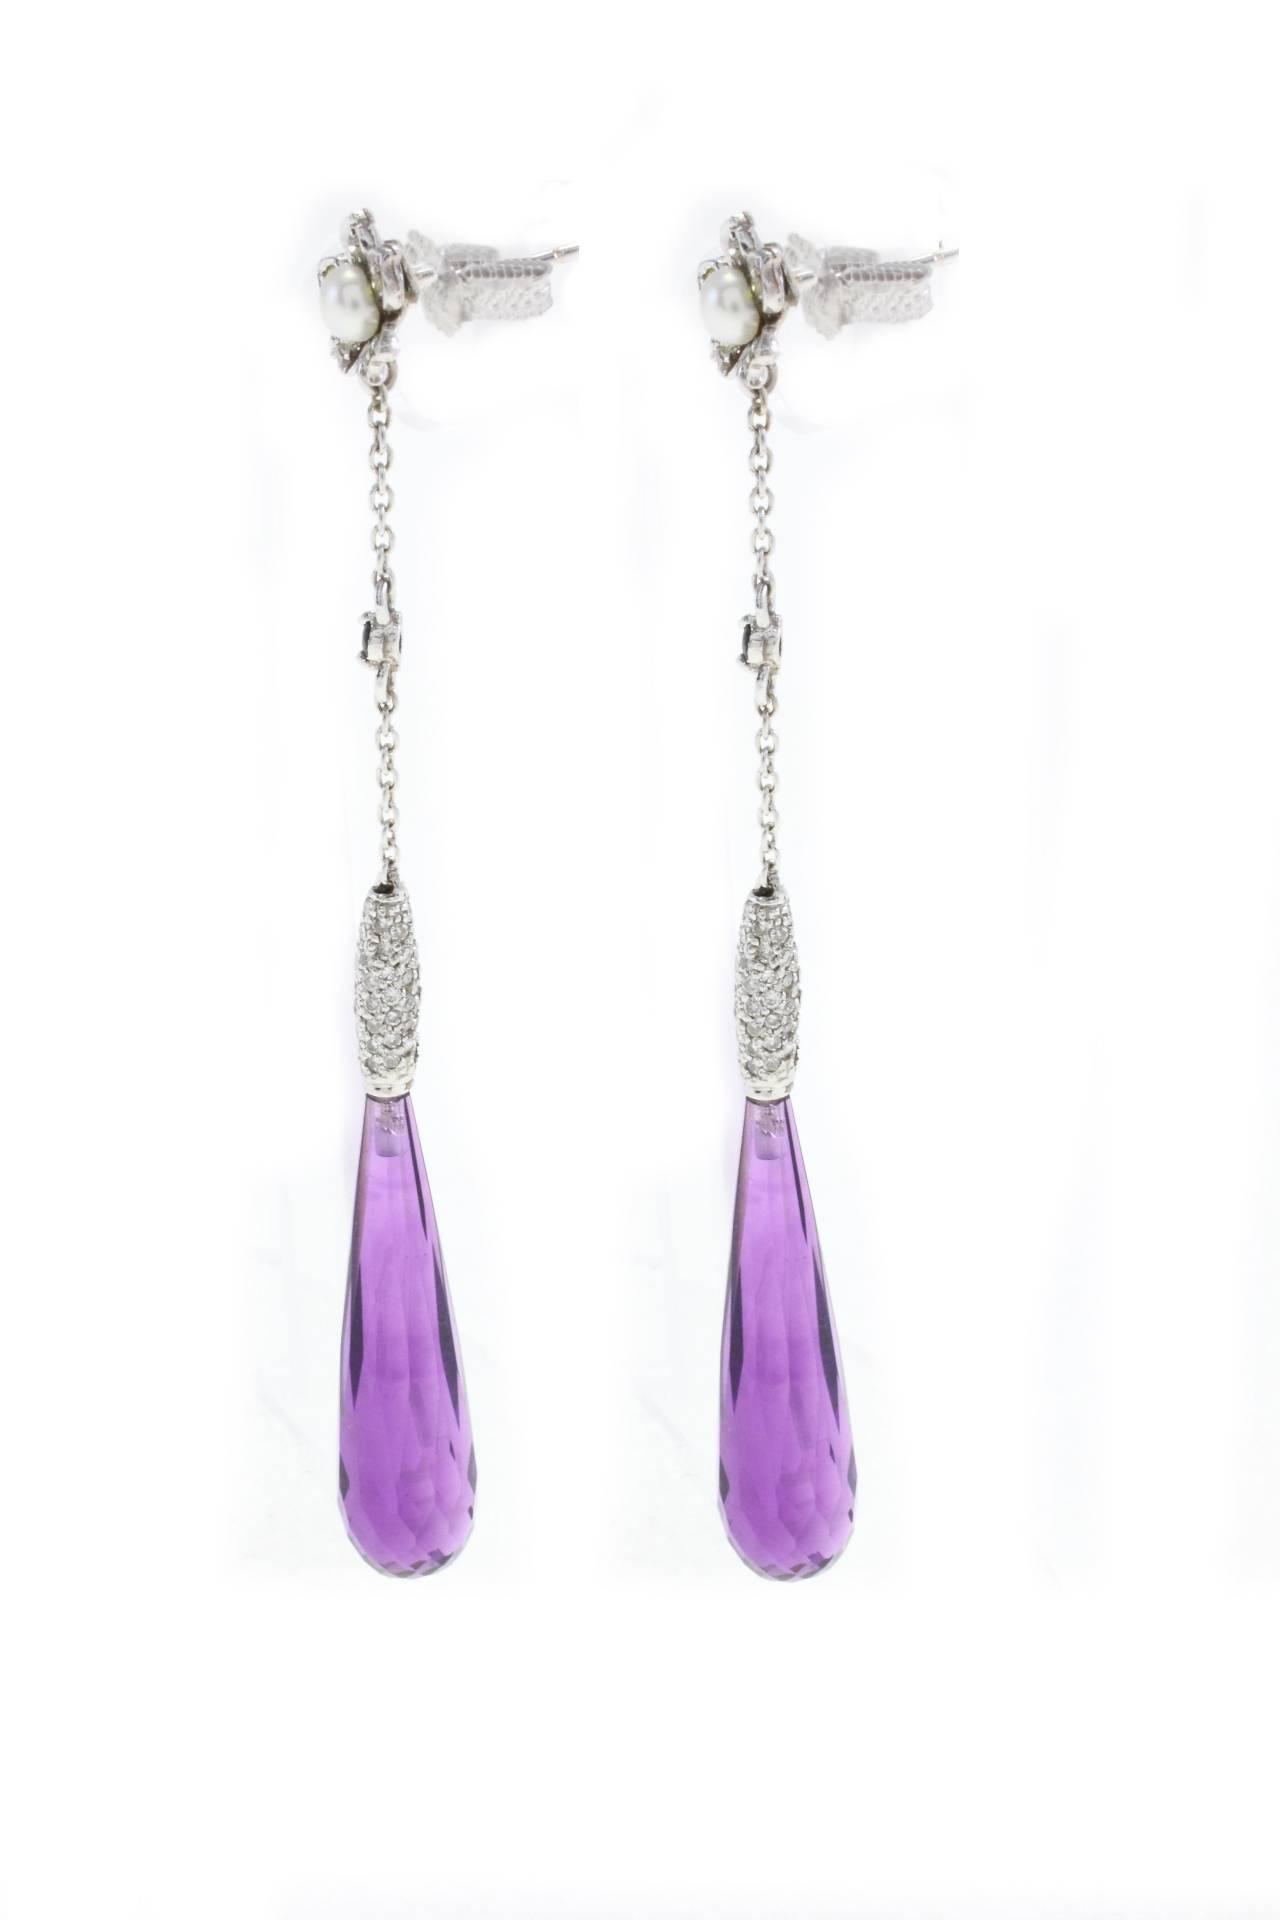 Classic and shapely earrings mounted on  18K white gold(2.49gr) embellished with a teardrop of amethyst(4.70 gr) and diamonds (1.05 Kt),on the top of the teardrop there is a little daisy with a pearl in the middle (0.40gr).
These earrings look